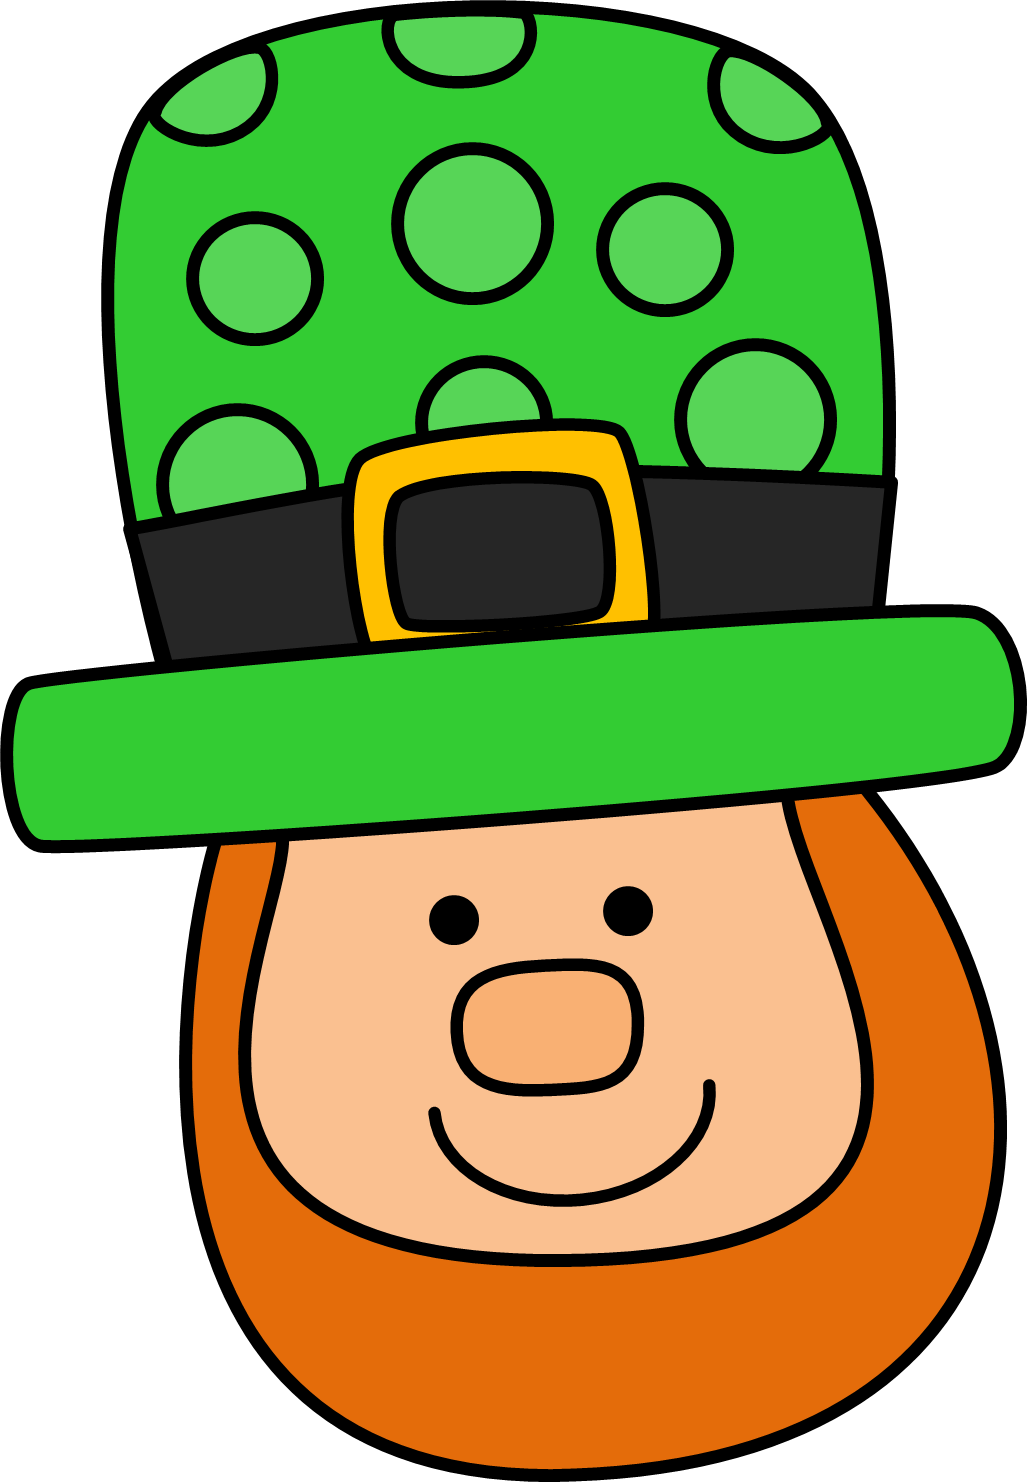 Patrick's Day We Are So Good At App Smashing In Our - Patrick's Day We Are So Good At App Smashing In Our (1027x1482)